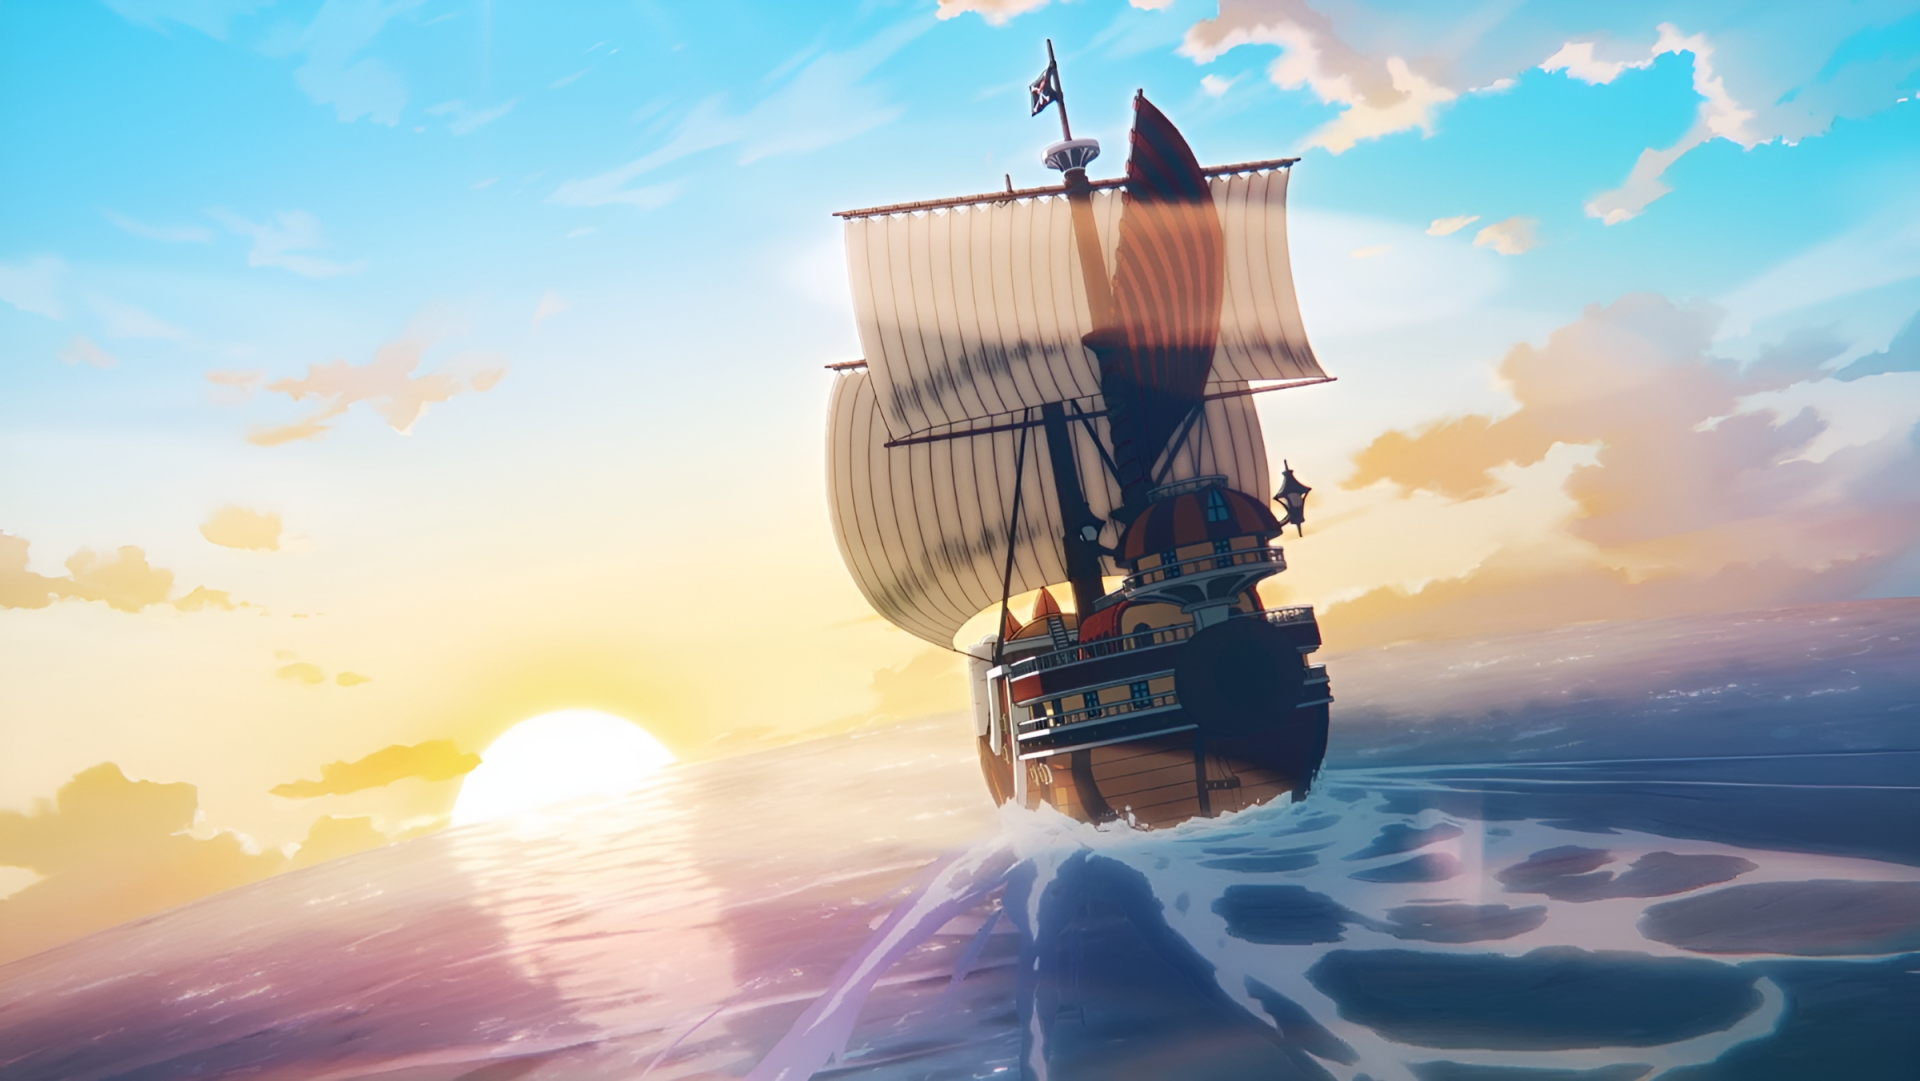 Thousand Sunny Adventure - HD Wallpaper Download